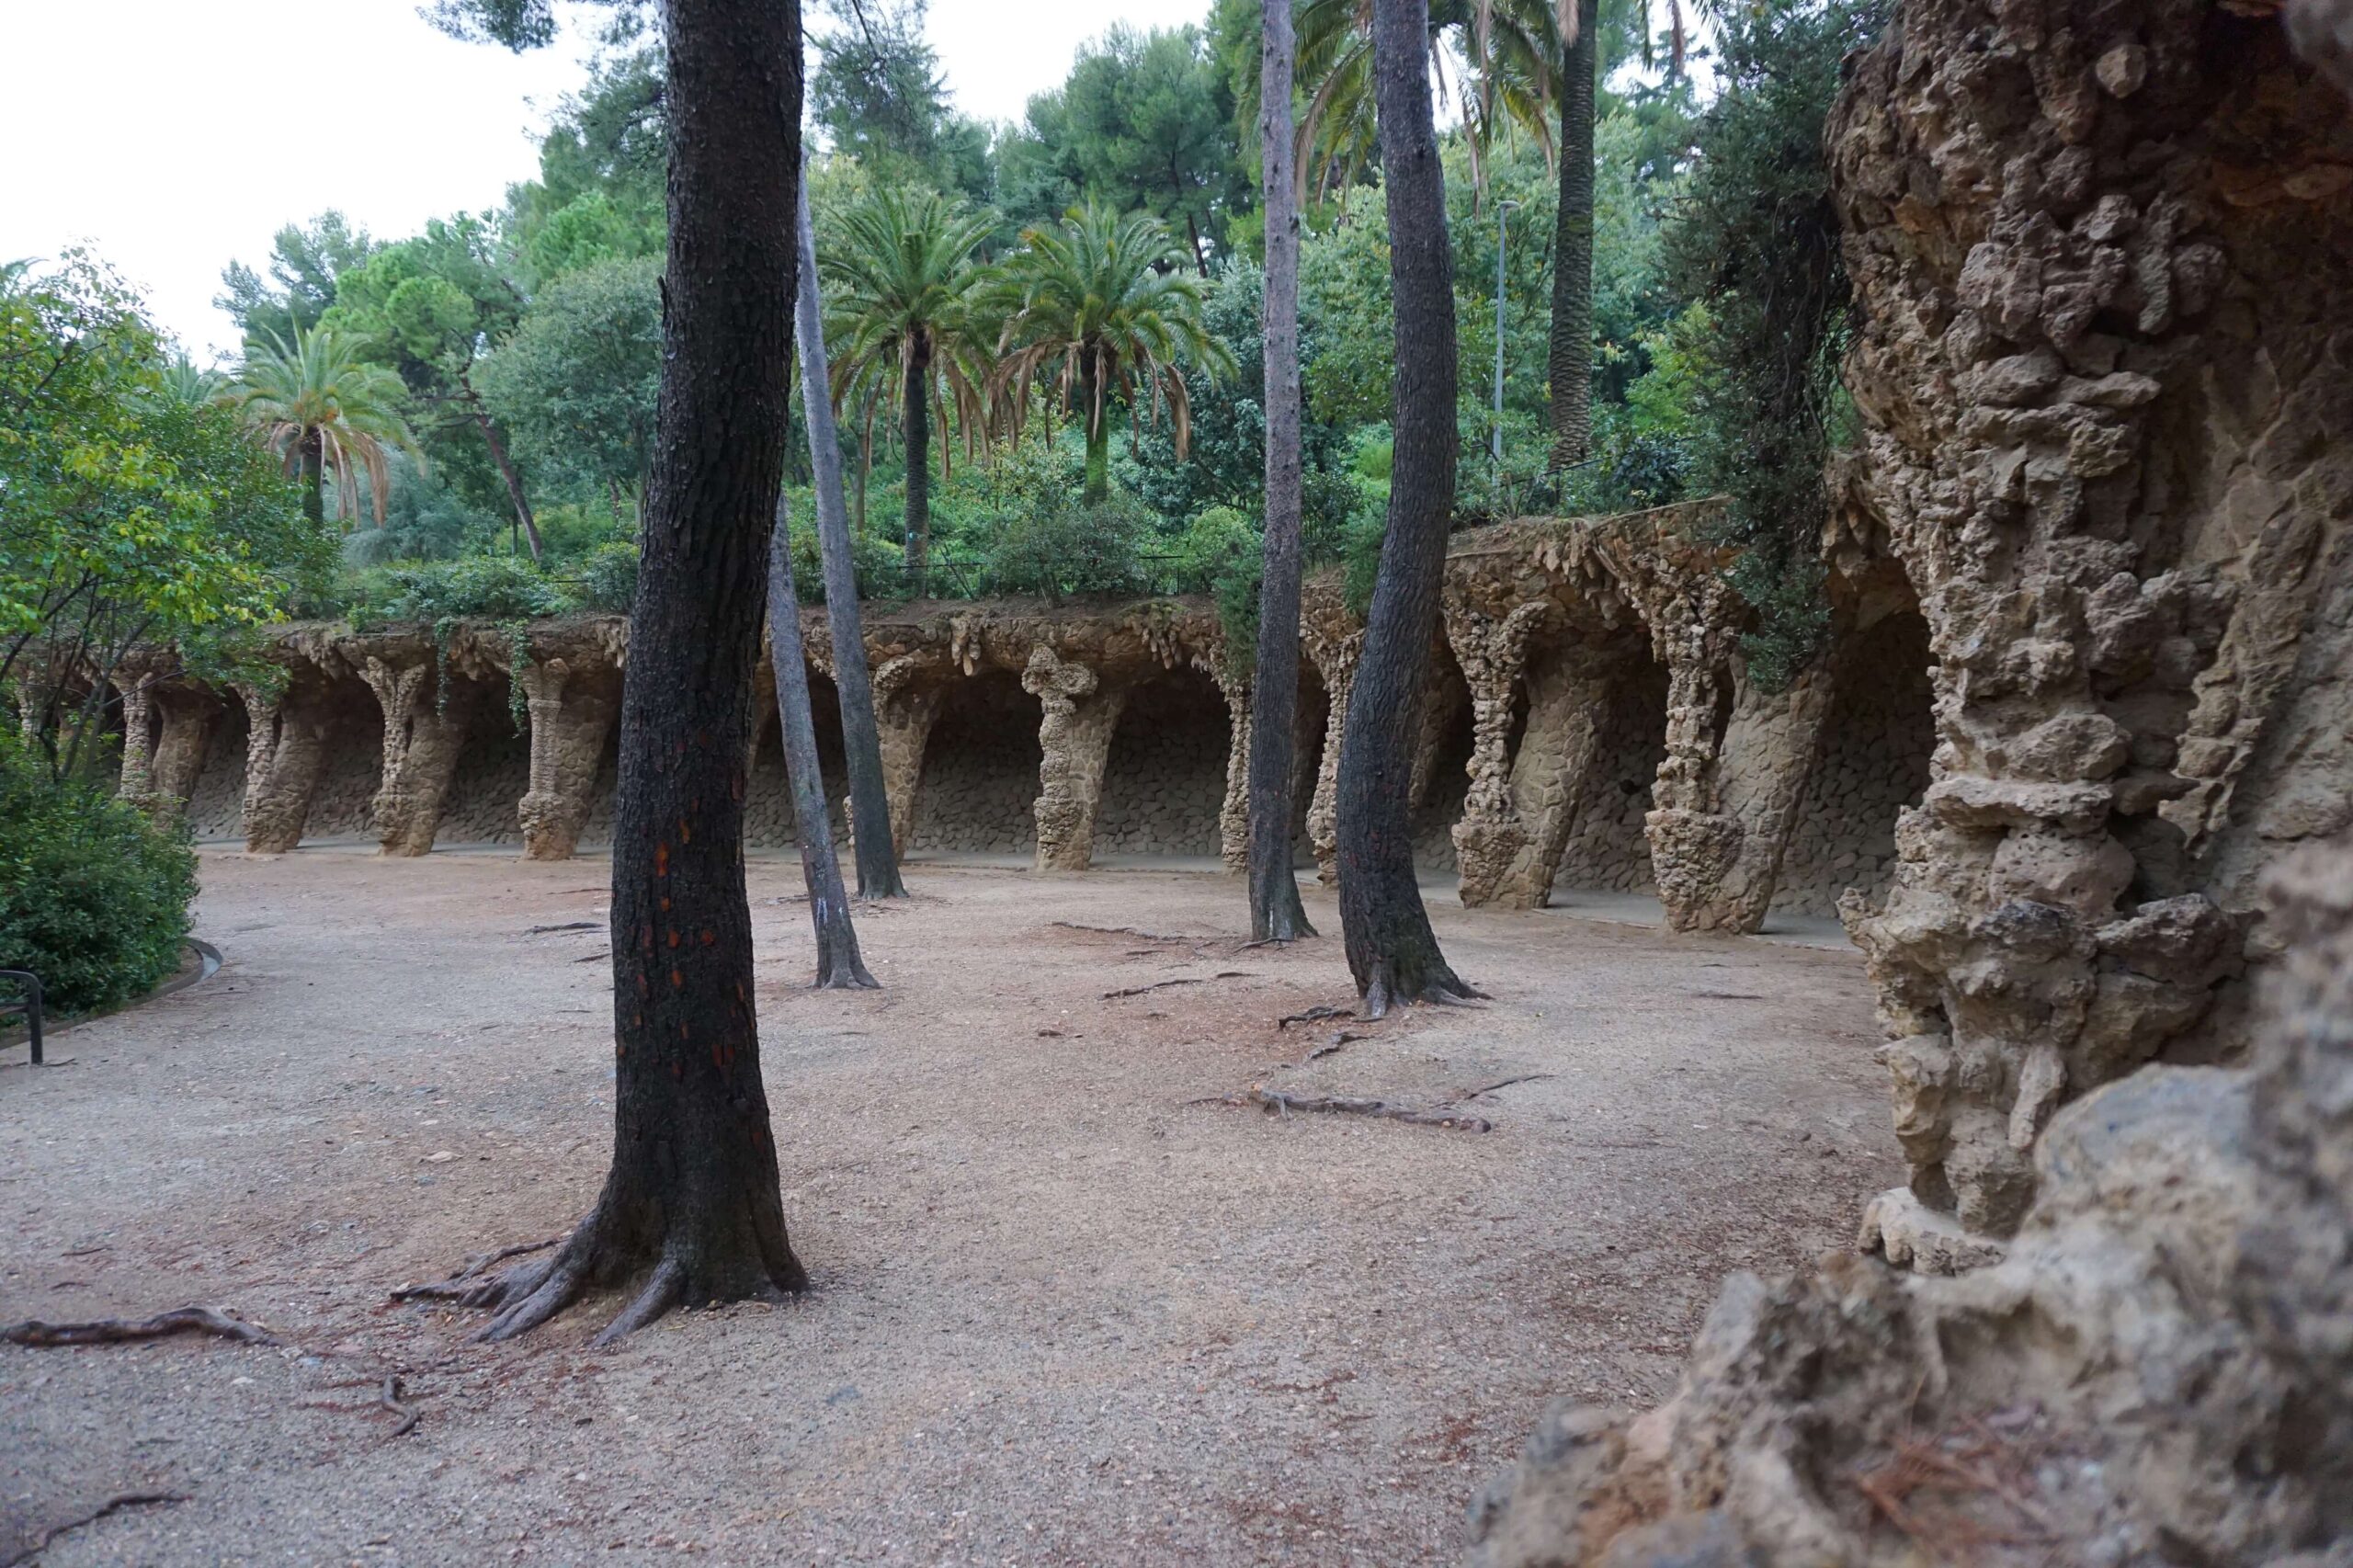 Portico of the Washerwoman, Parc Guell, Barcelona